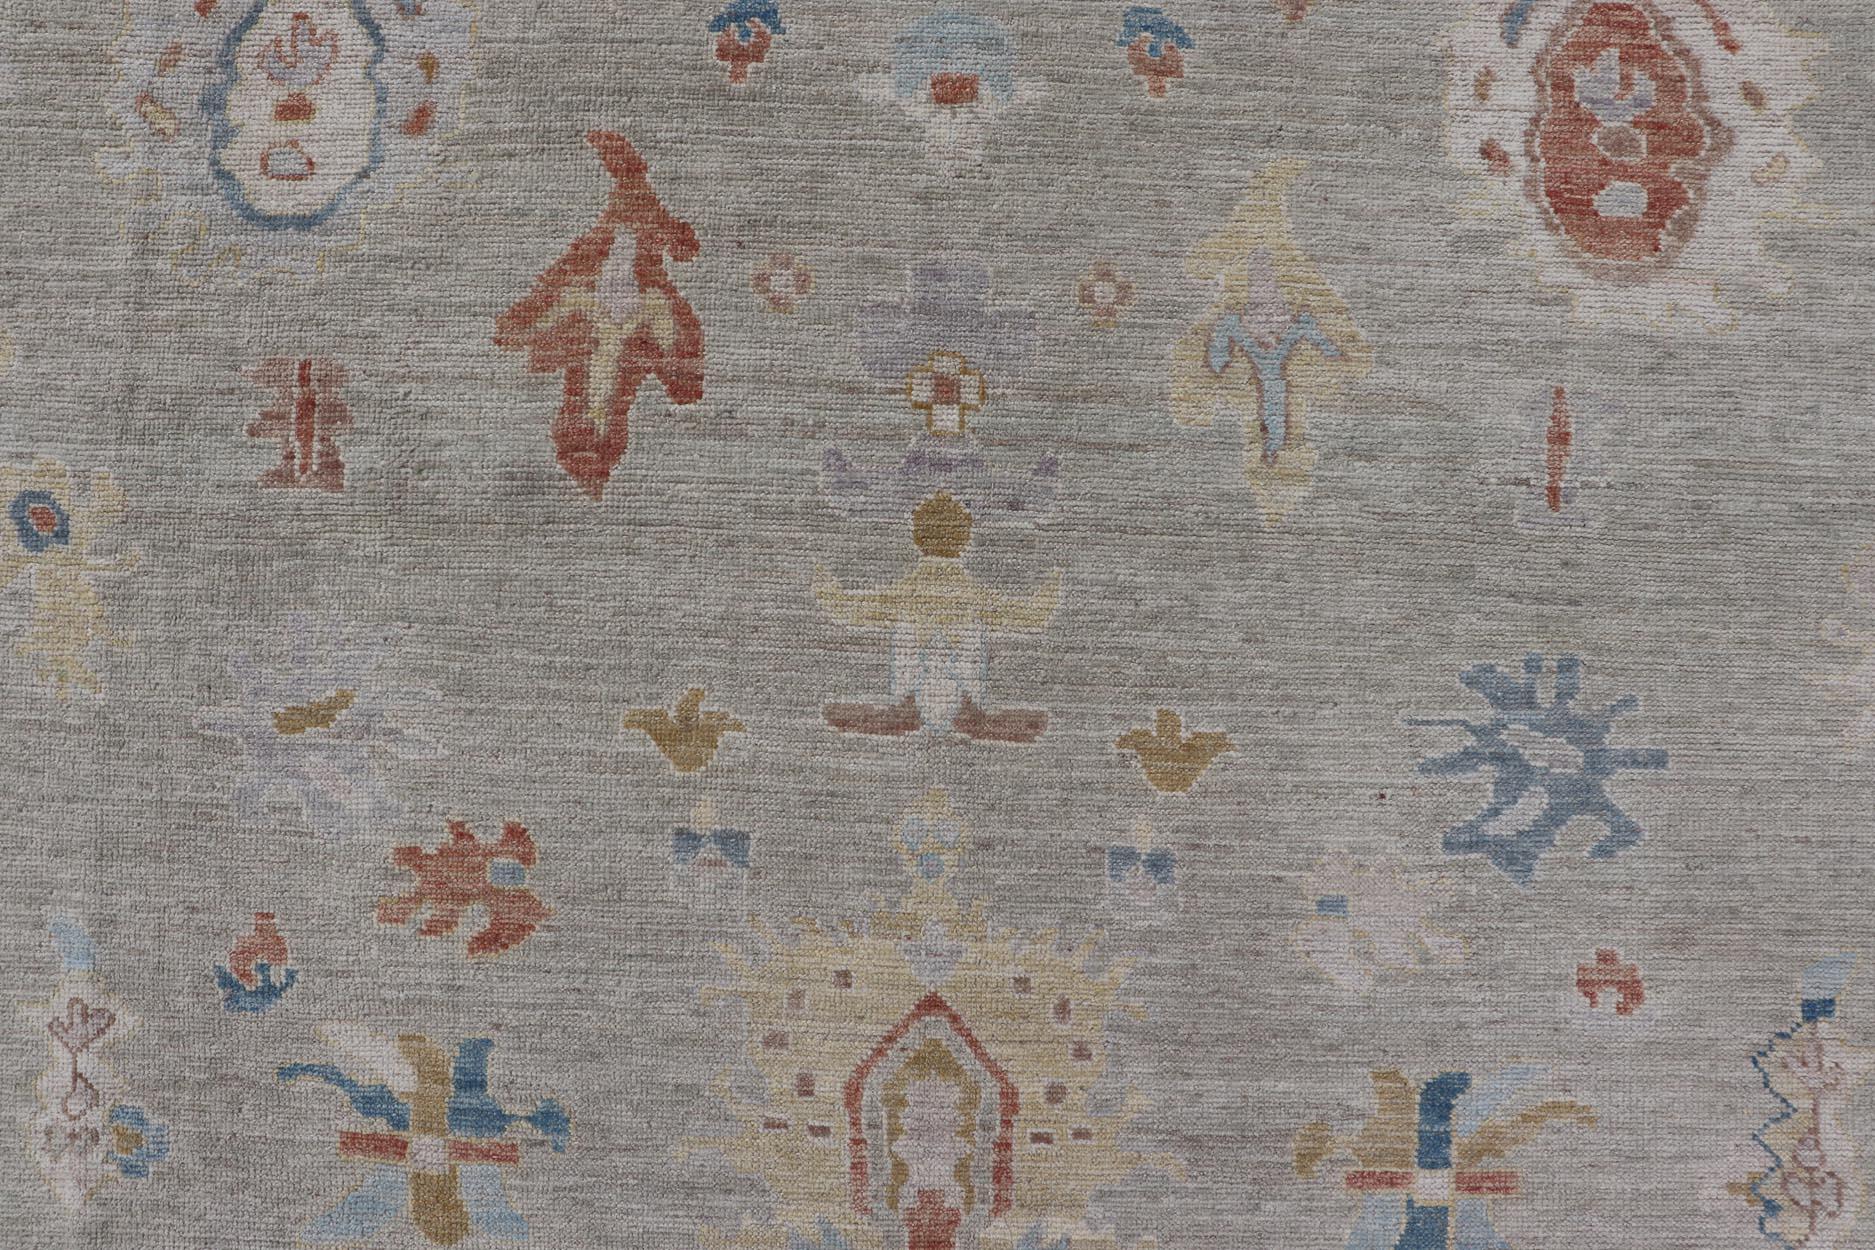 Modern Oushak Floral Motif on Light Taupe Background and Colorful Design. Country of Origin: Afghanistan  Type: Oushak Keivan Woven Arts; rug / AWR-8002,  Design: Floral, All-Over. 21-st Century
 
Measures: 8'0 x 10'2 

The border and background of